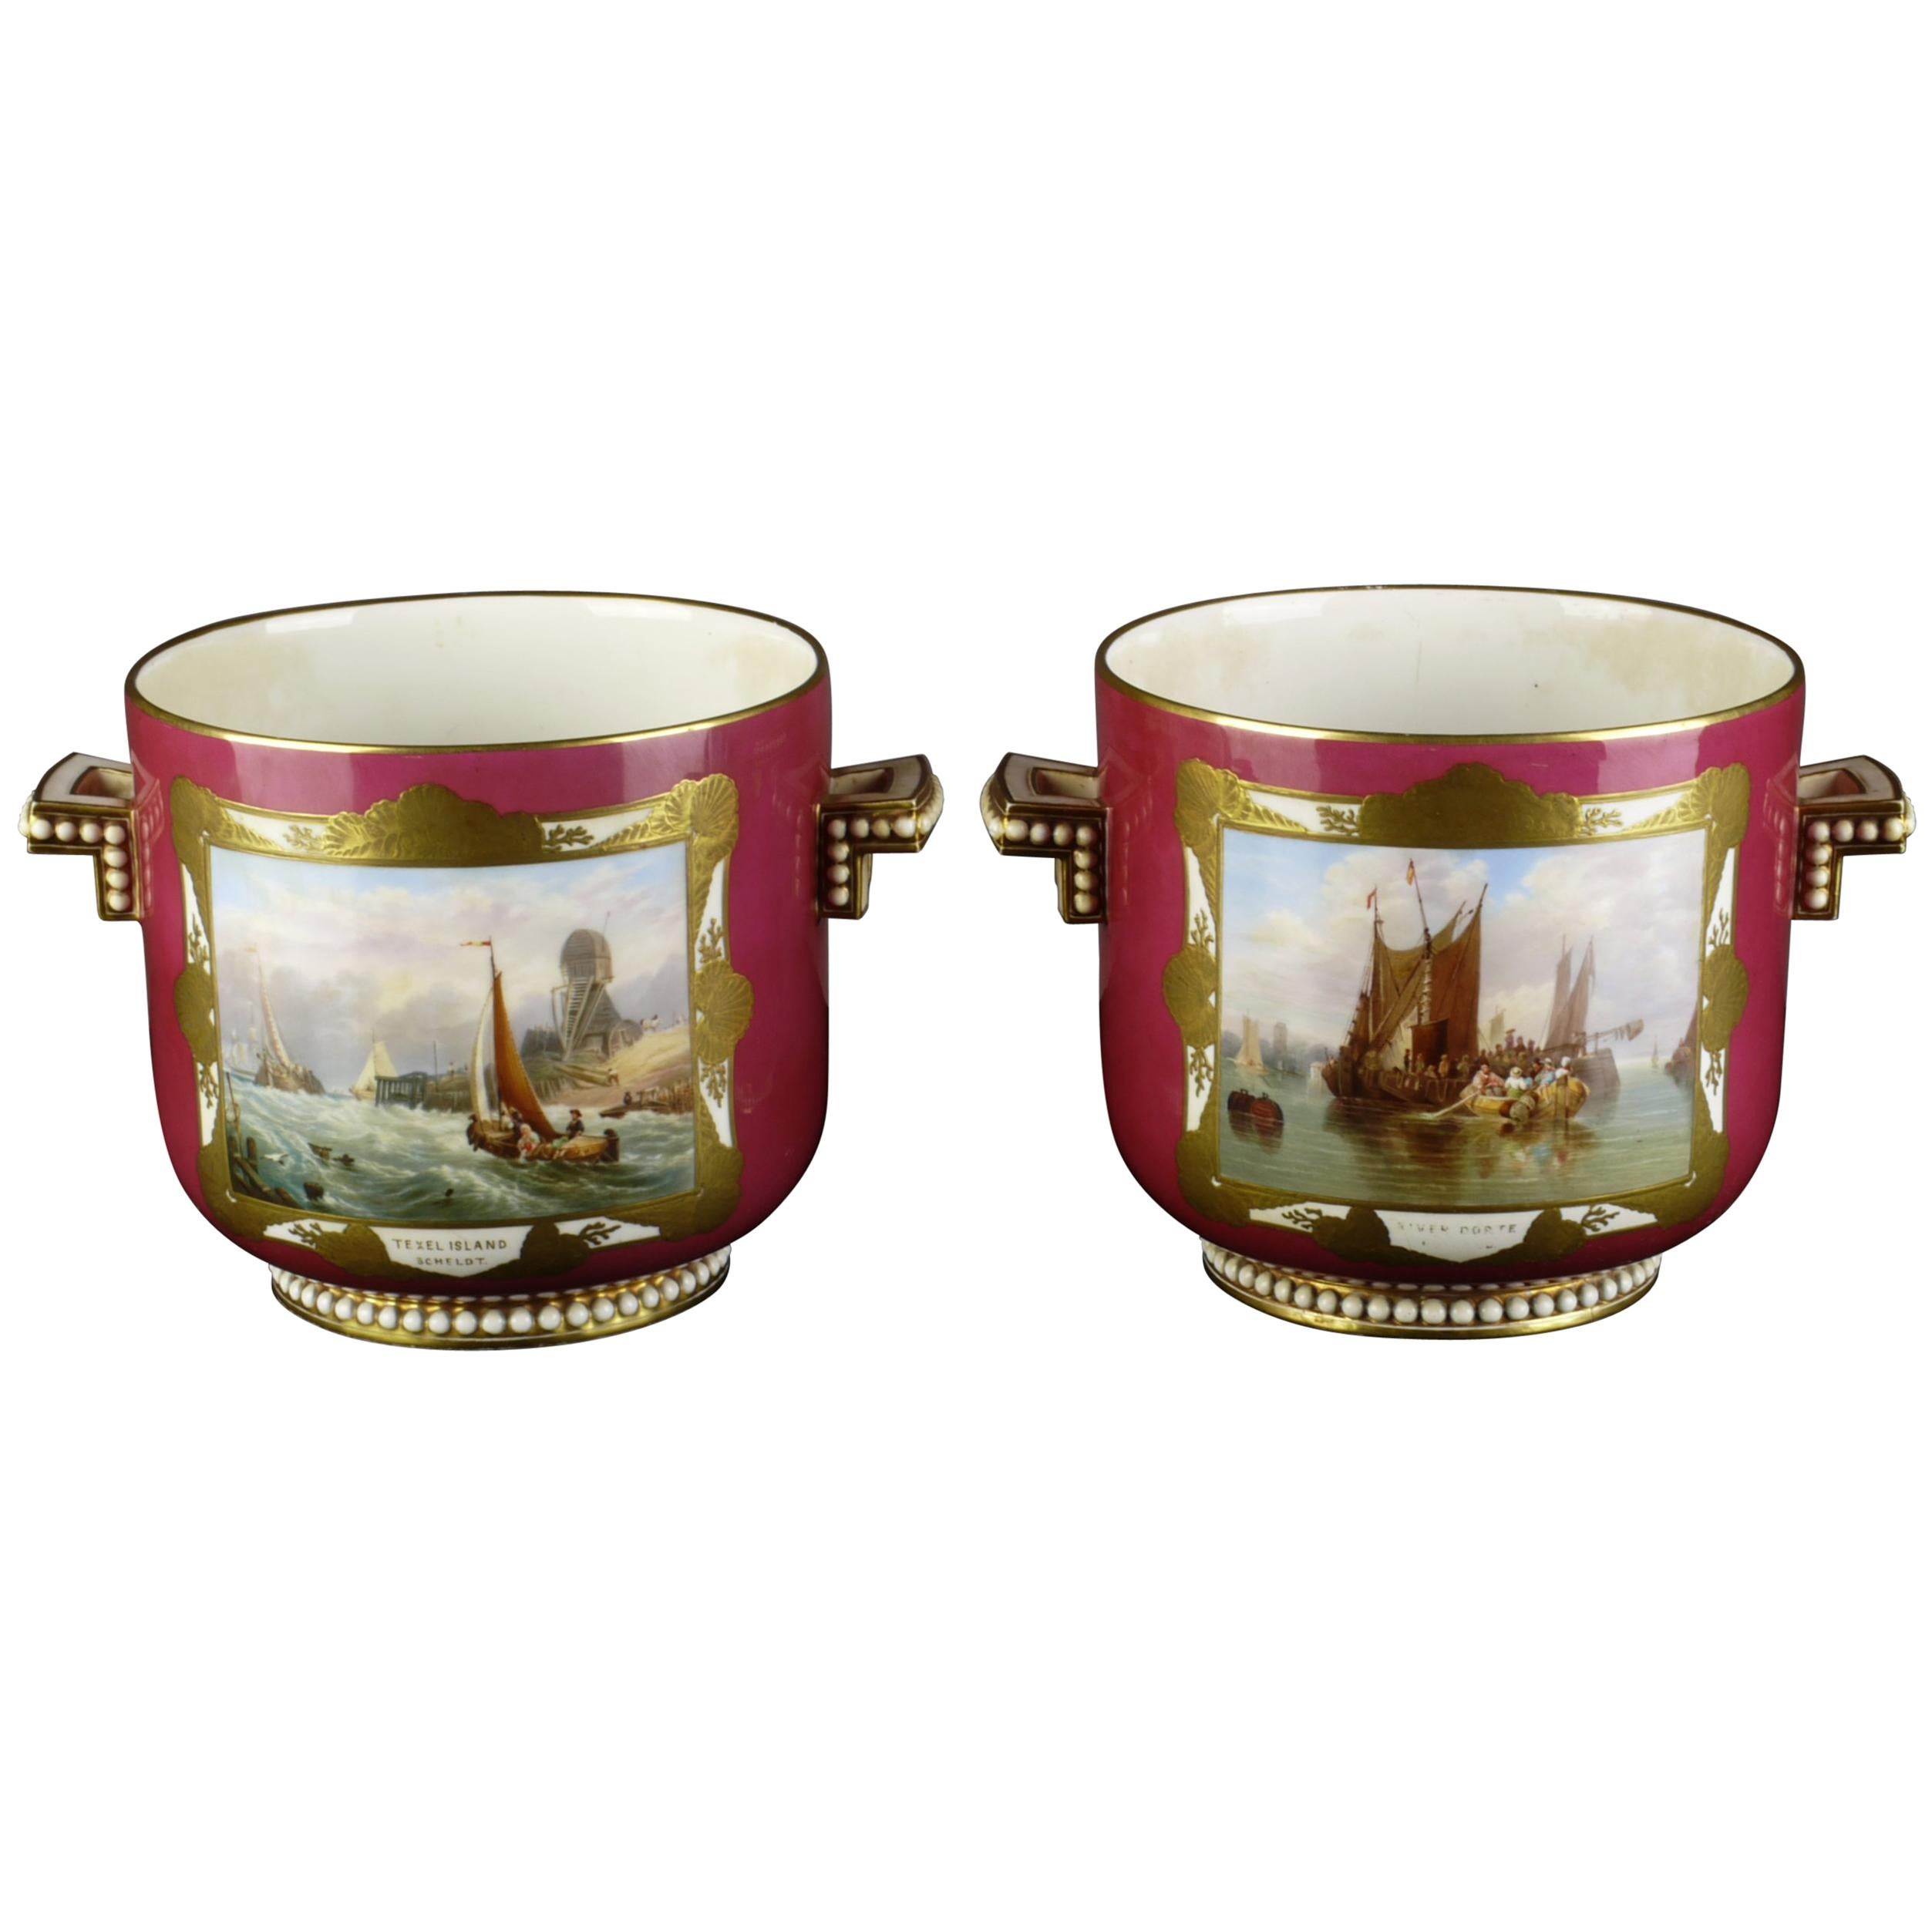 Pair of English Porcelain Planters Maritime and Landscape Paintings, circa 1850 For Sale